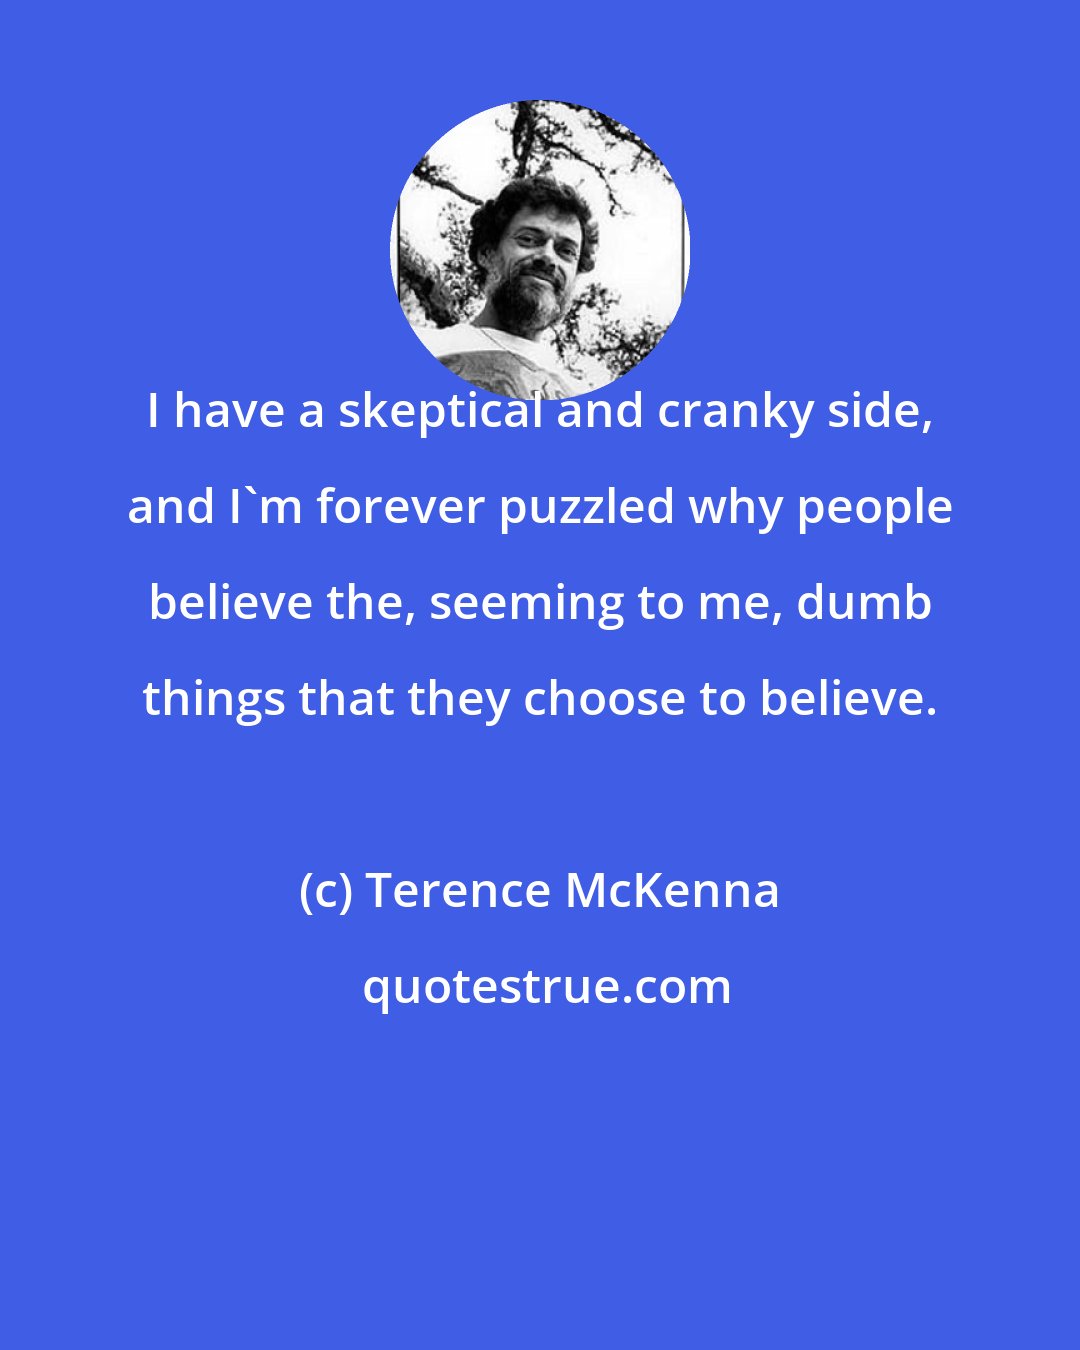 Terence McKenna: I have a skeptical and cranky side, and I'm forever puzzled why people believe the, seeming to me, dumb things that they choose to believe.